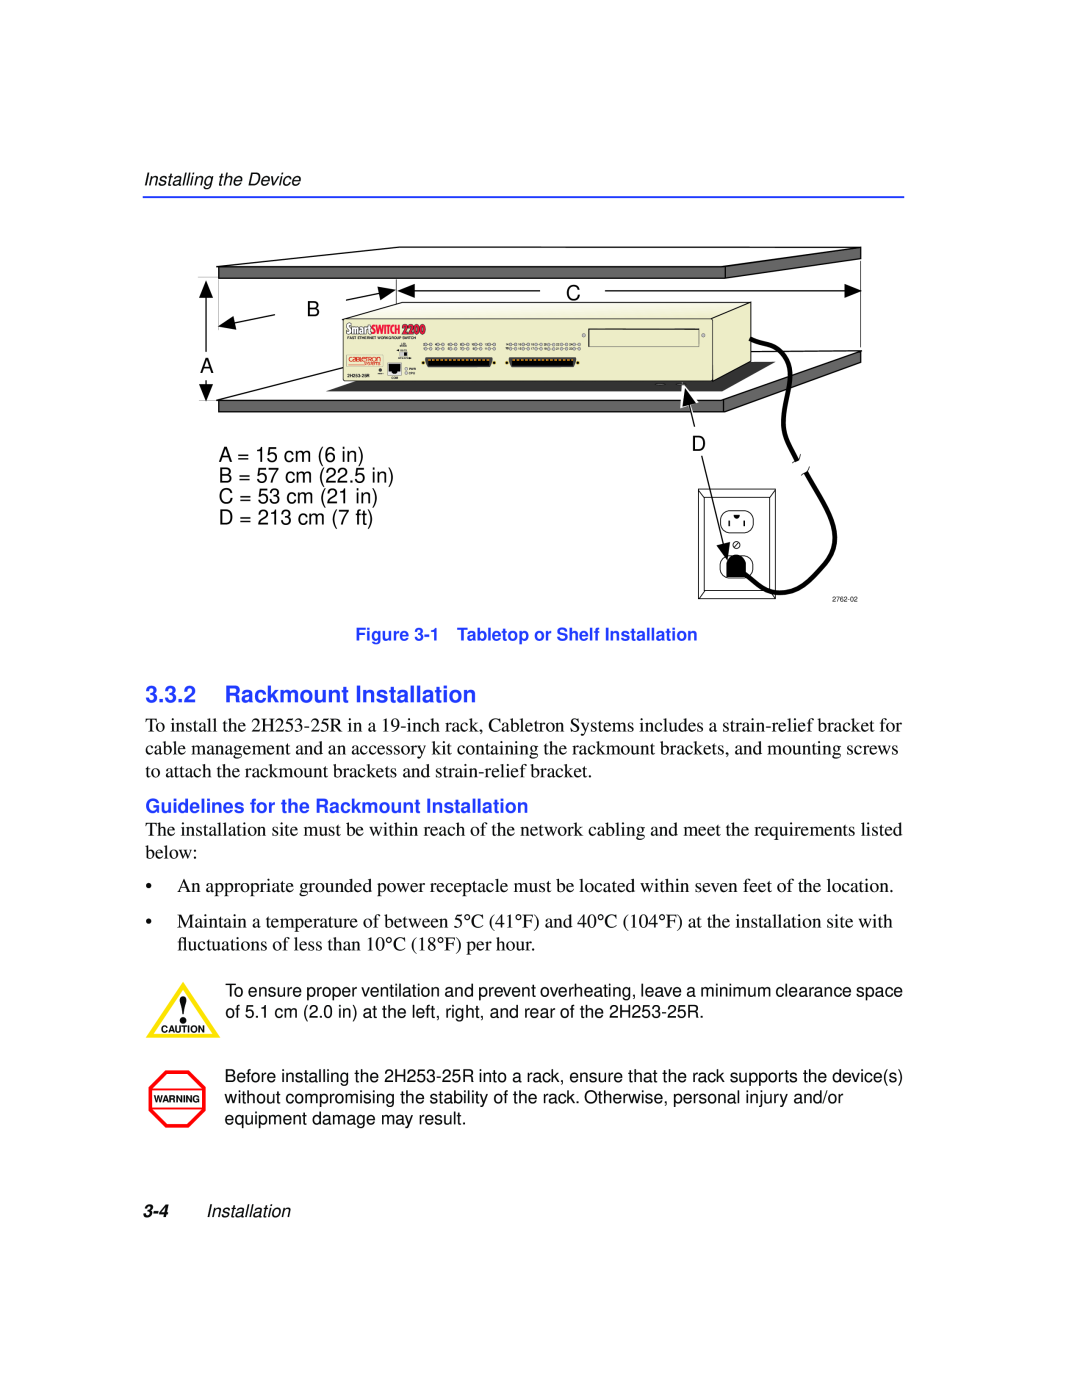 Cabletron Systems 2H253-25R manual Guidelines for the Rackmount Installation 